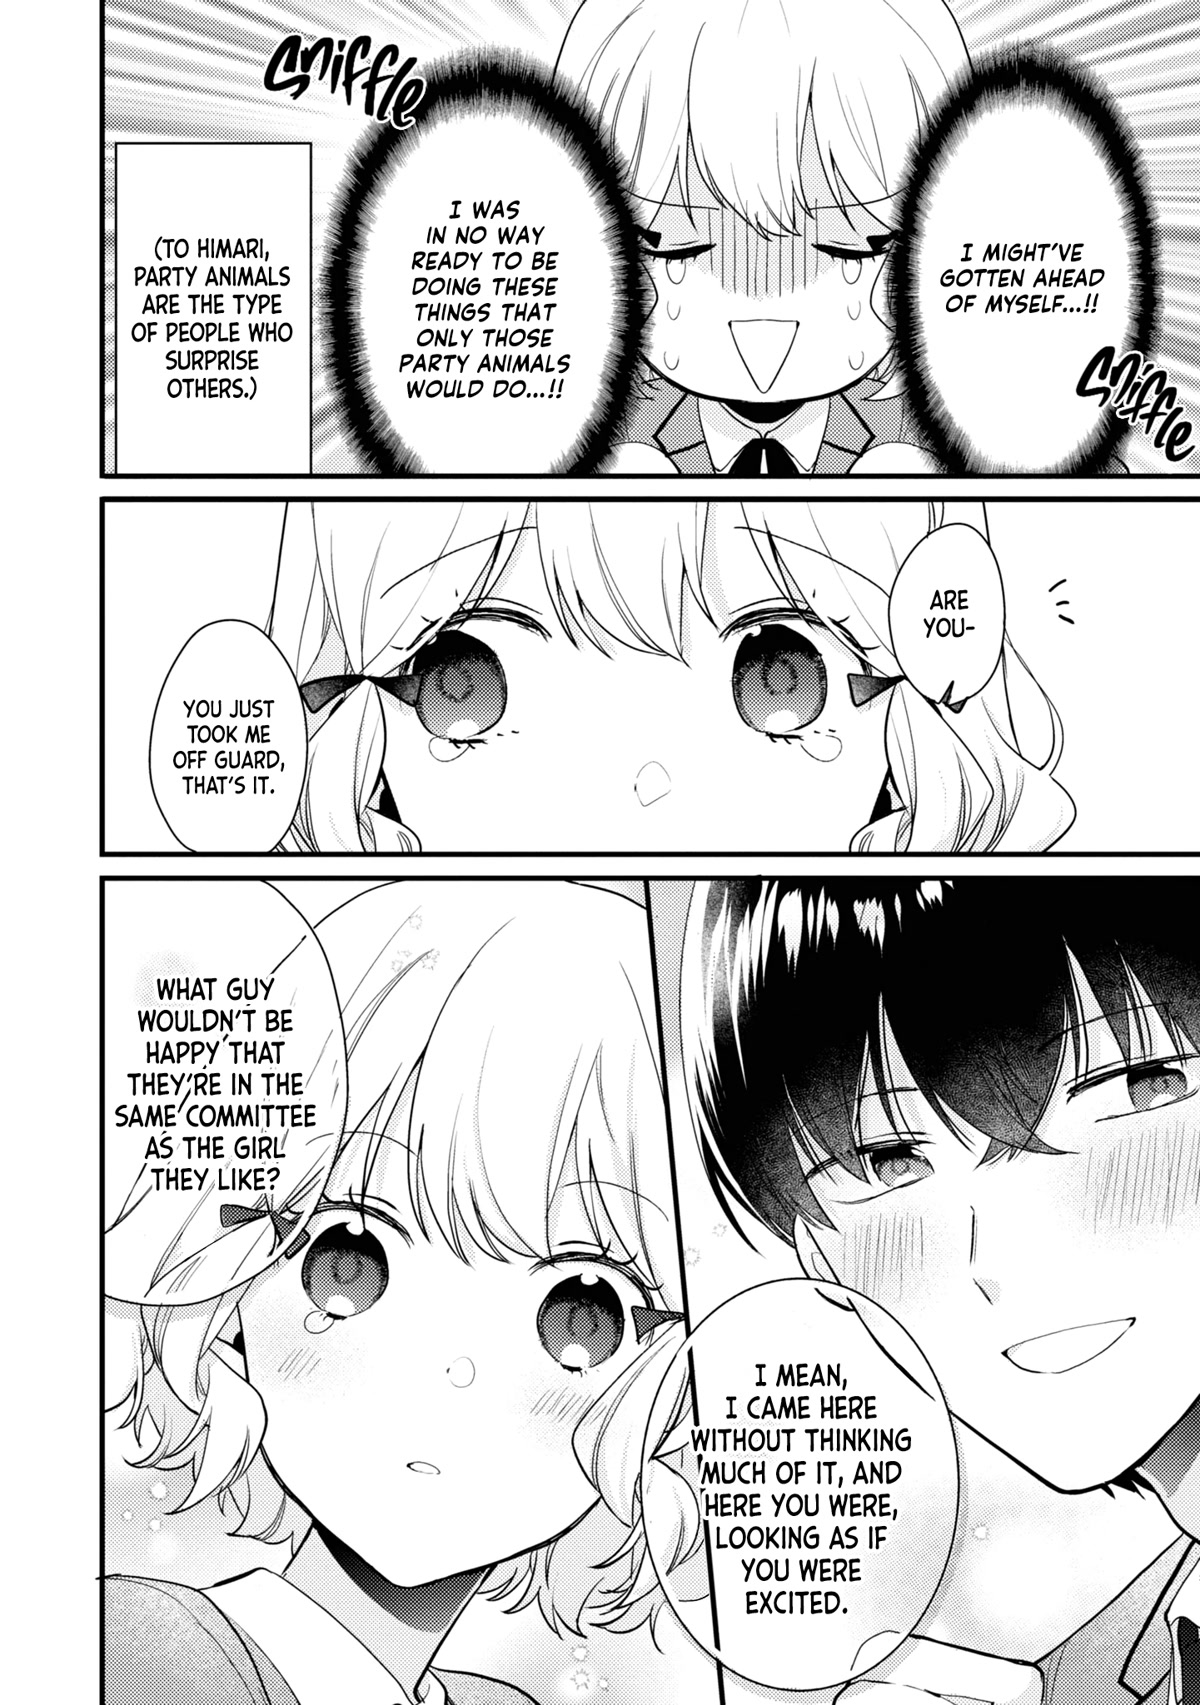 I Have A Second Chance At Life, So I’Ll Pamper My Yandere Boyfriend For A Happy Ending!! Chapter 3 #18